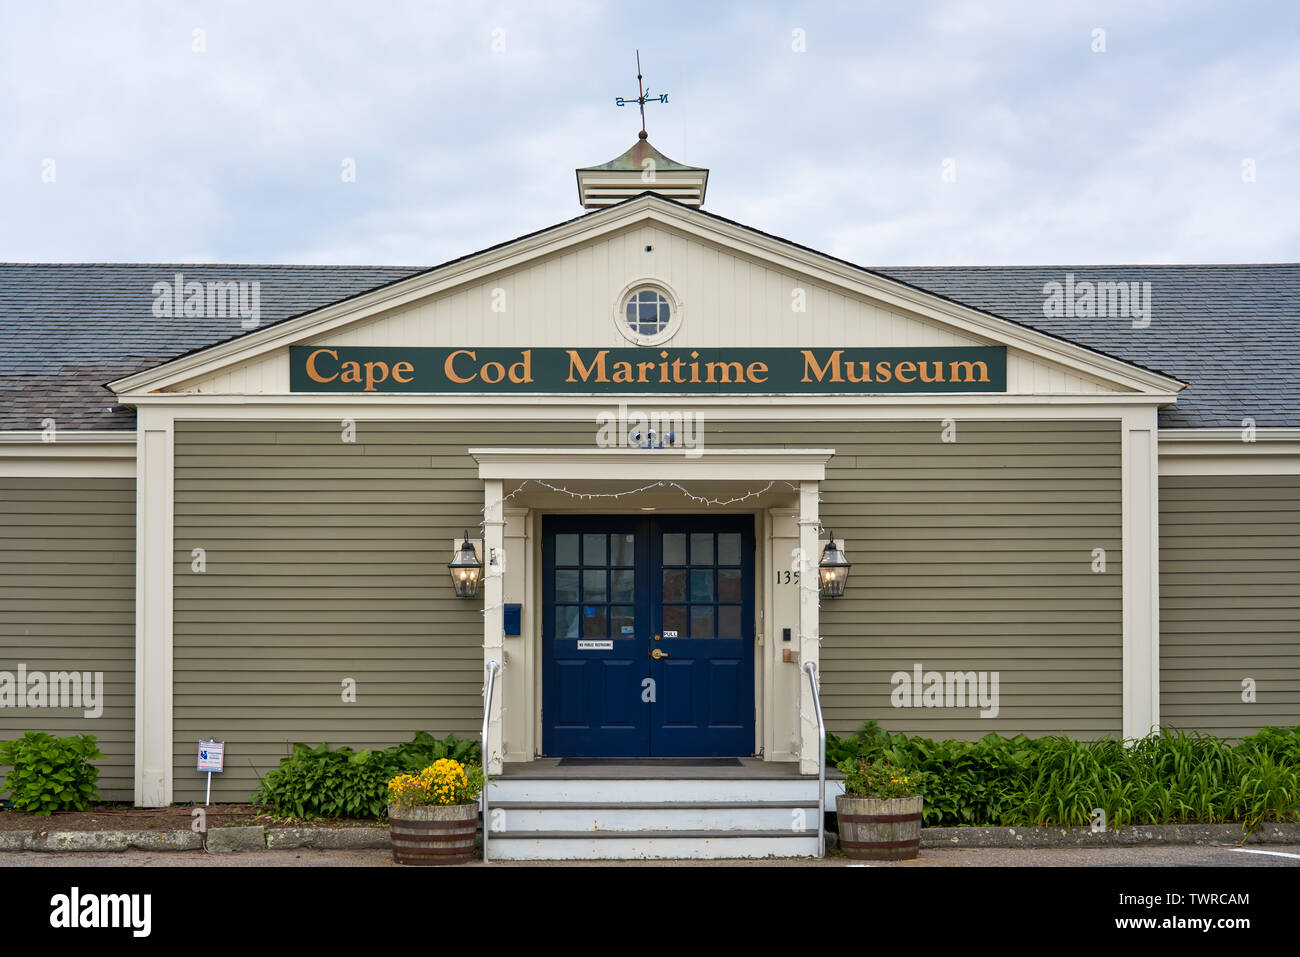 Hyannis, MA - June 10, 2019: Cape Cod Maritime Museum is focused on the maritime culture of the area. Stock Photo